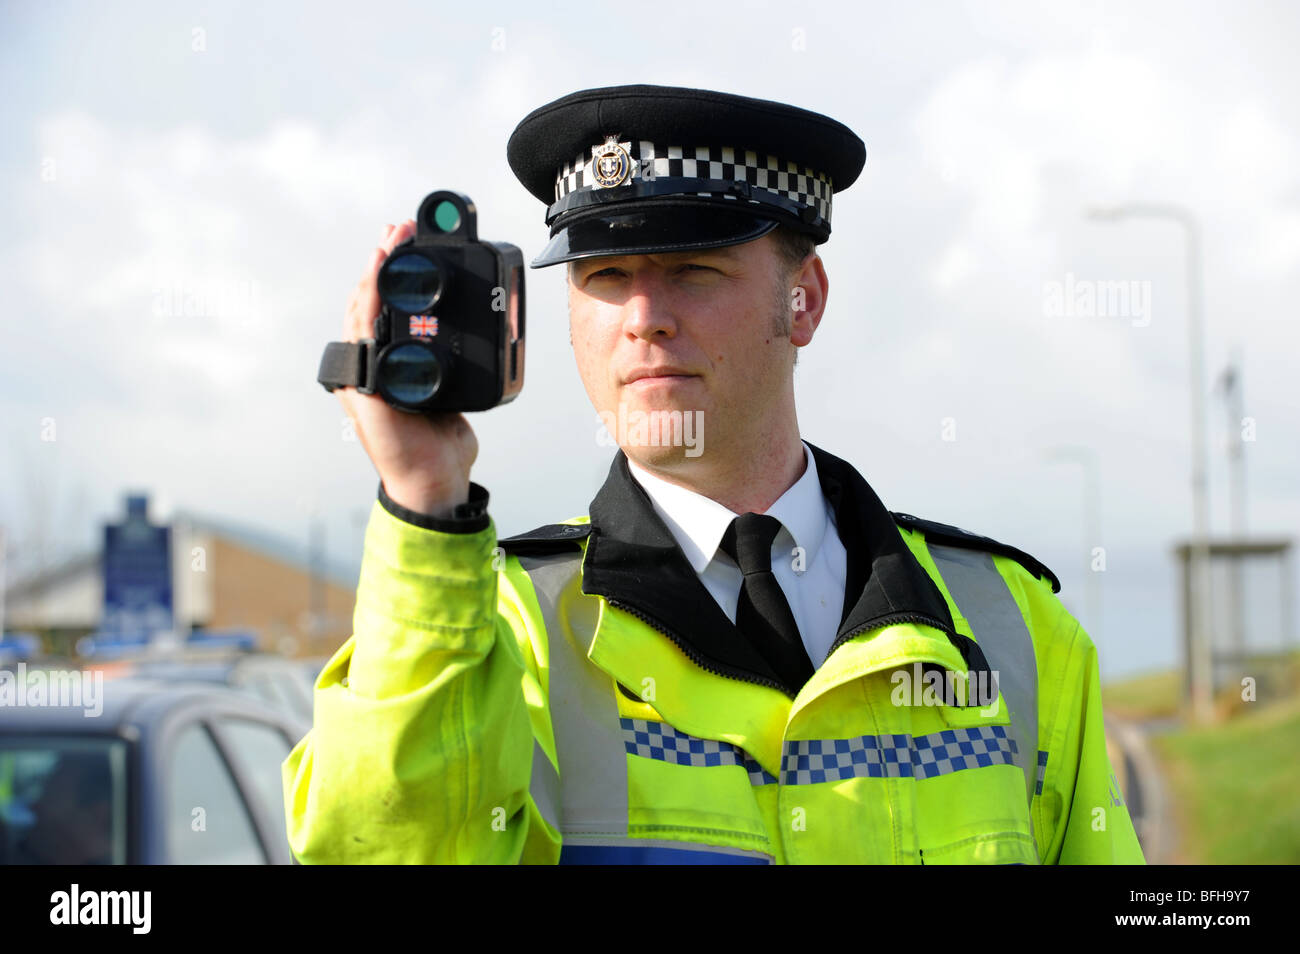 A policeman from Sussex police uses a hand held speed camera at the side of a busy road Stock Photo